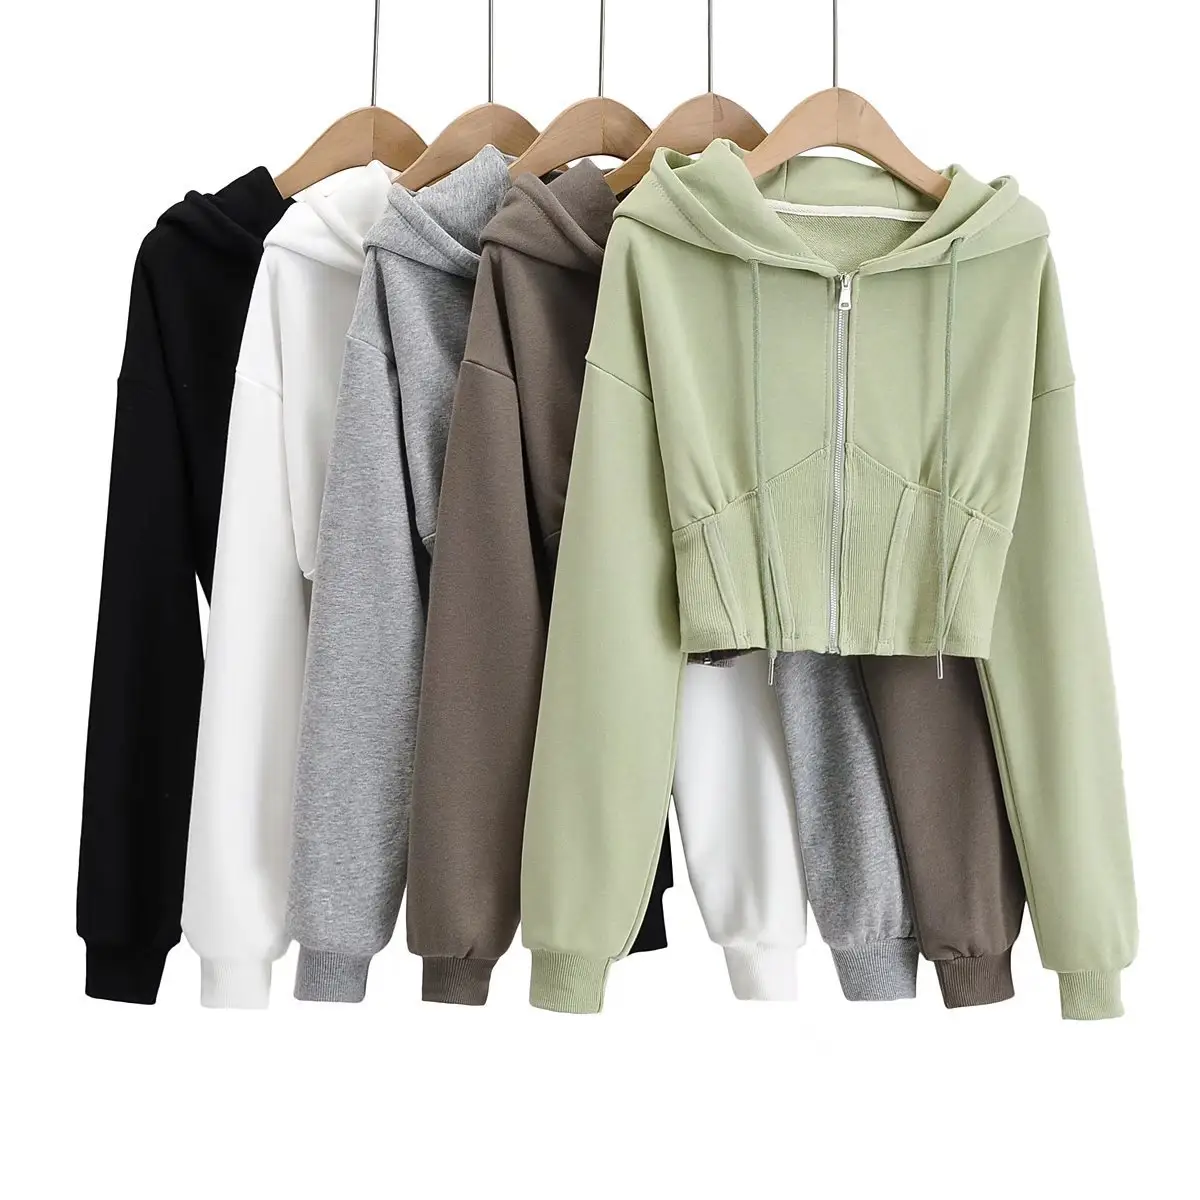 New Casual Solid Color Patch Stitching Long-Sleeved Hooded sweatshirt Women's Zipper Top